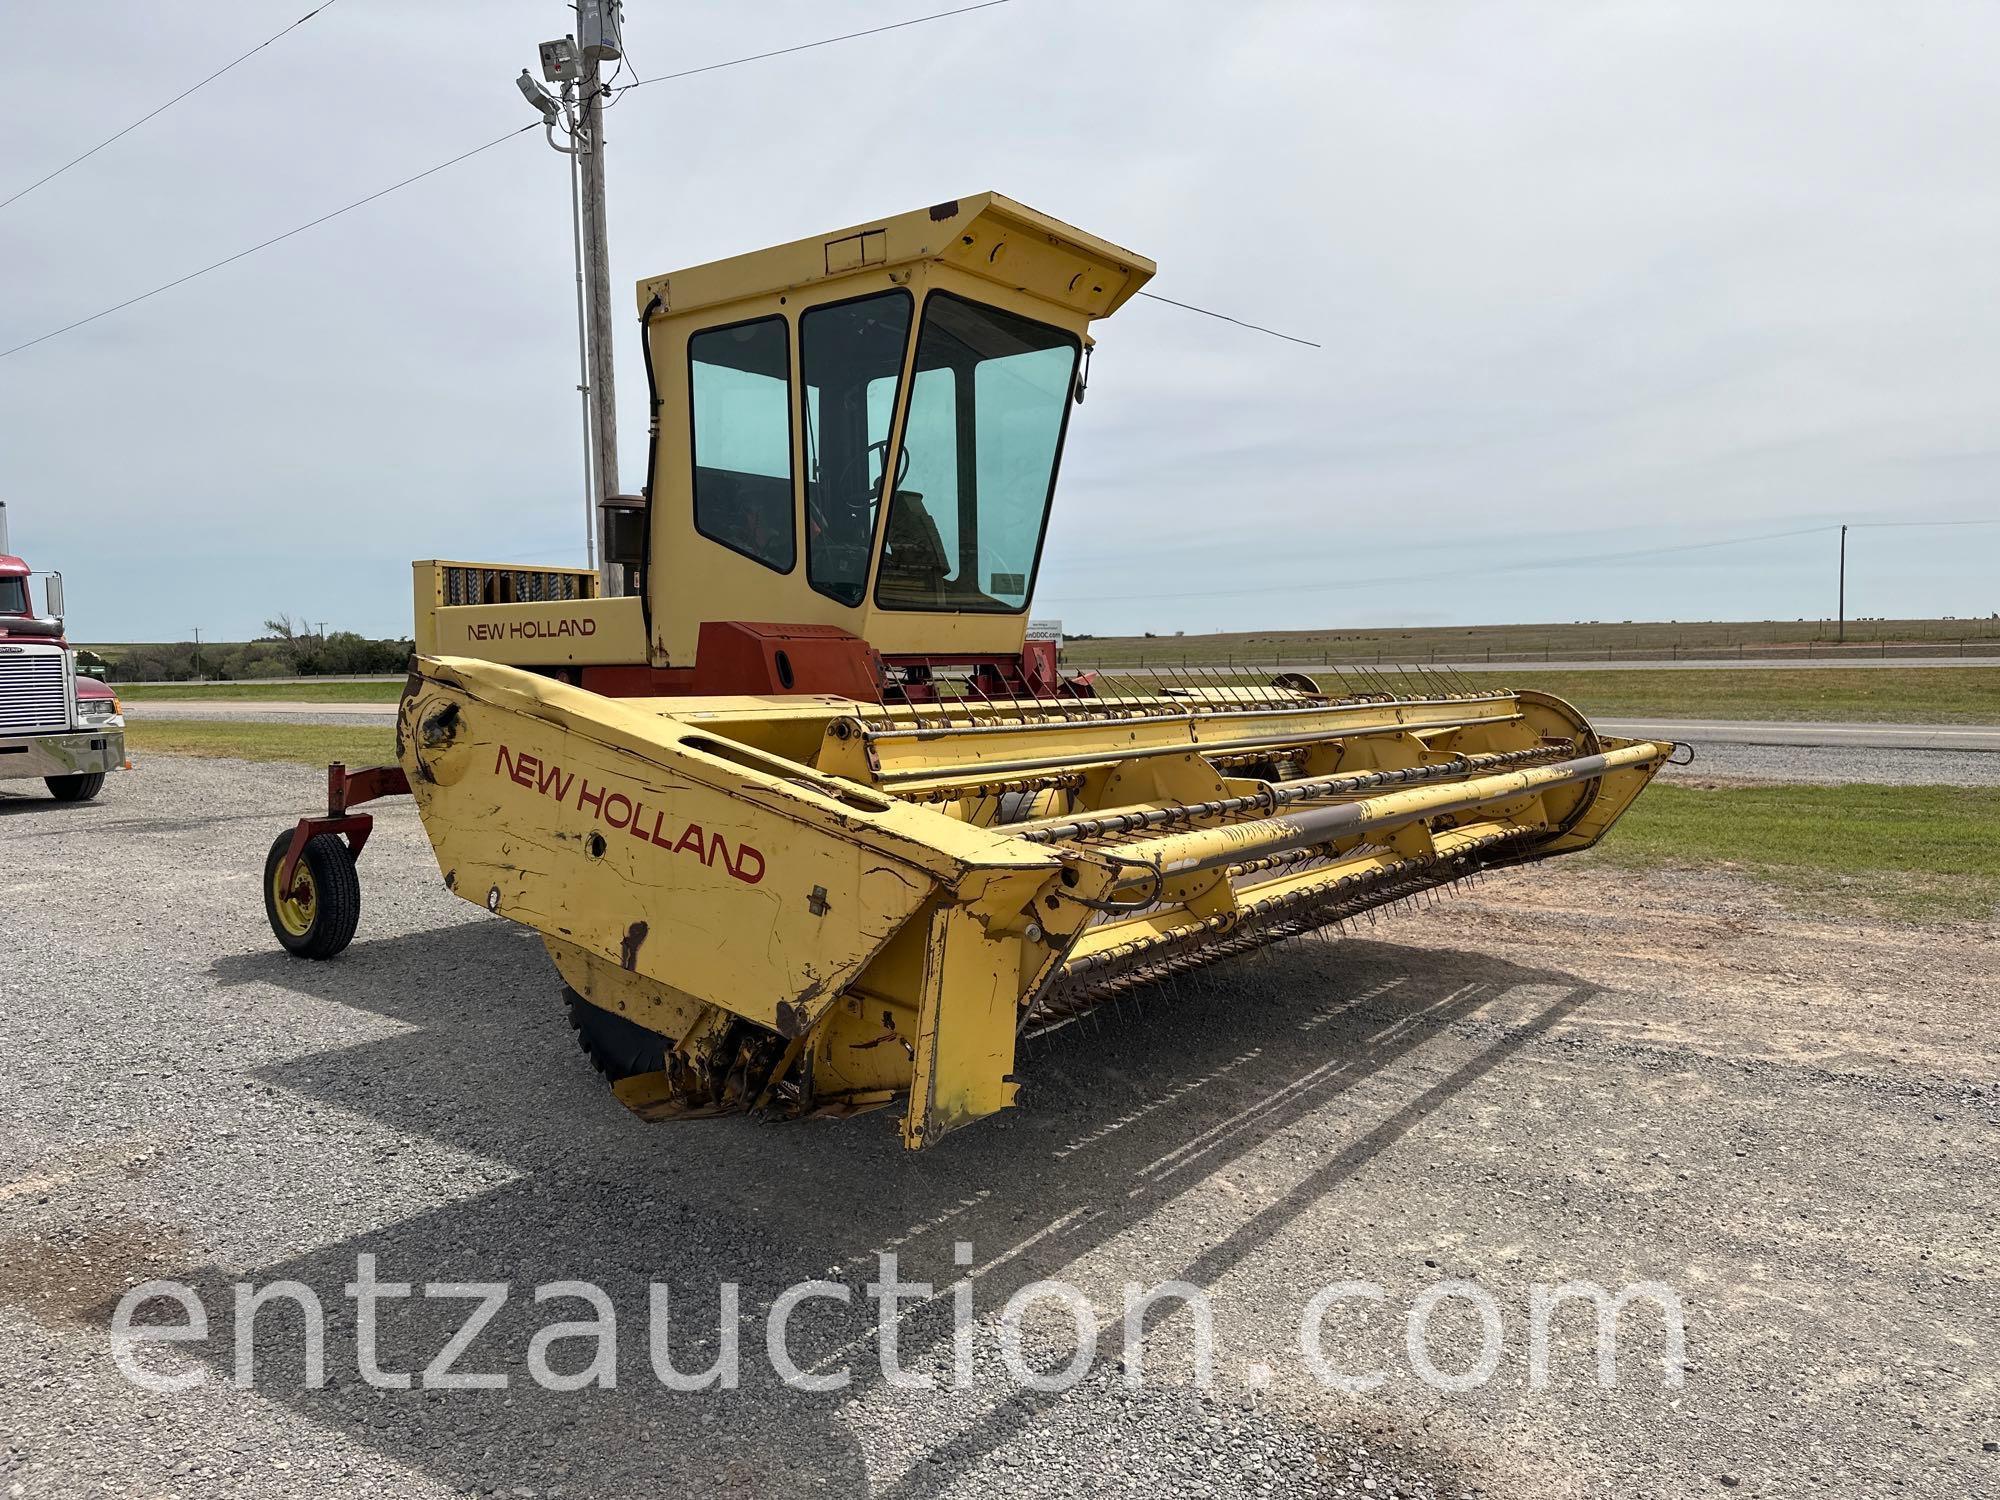 1982 NEW HOLLAND 1116 SELF-PROPELLED SWATHER, 16'